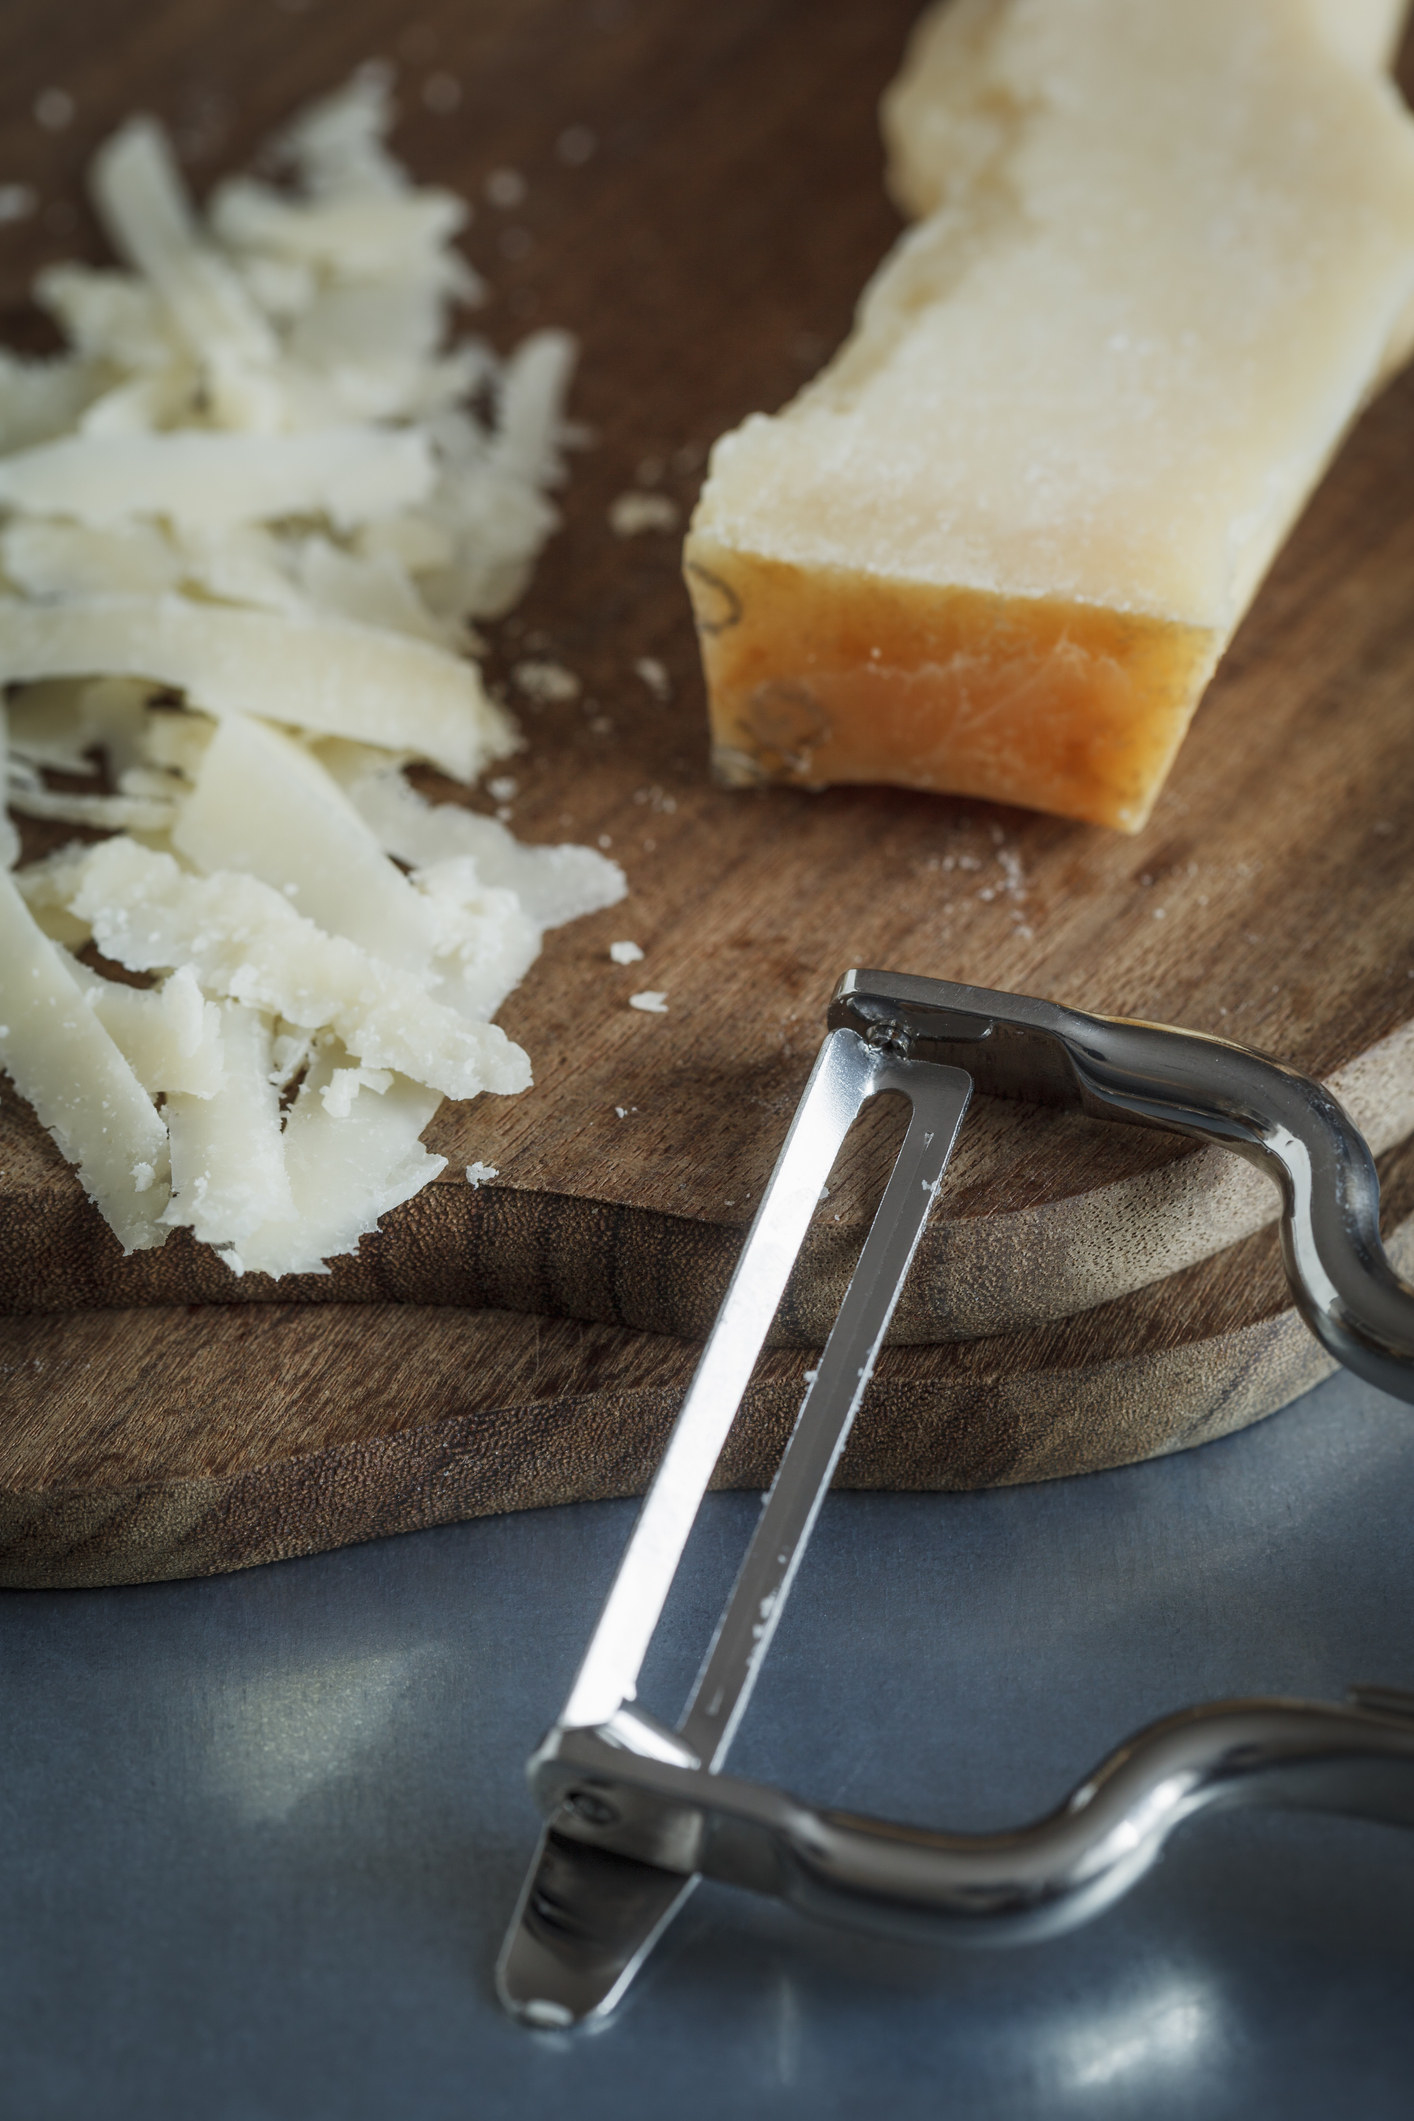 Shredded parmesan with peeler on chopping board.